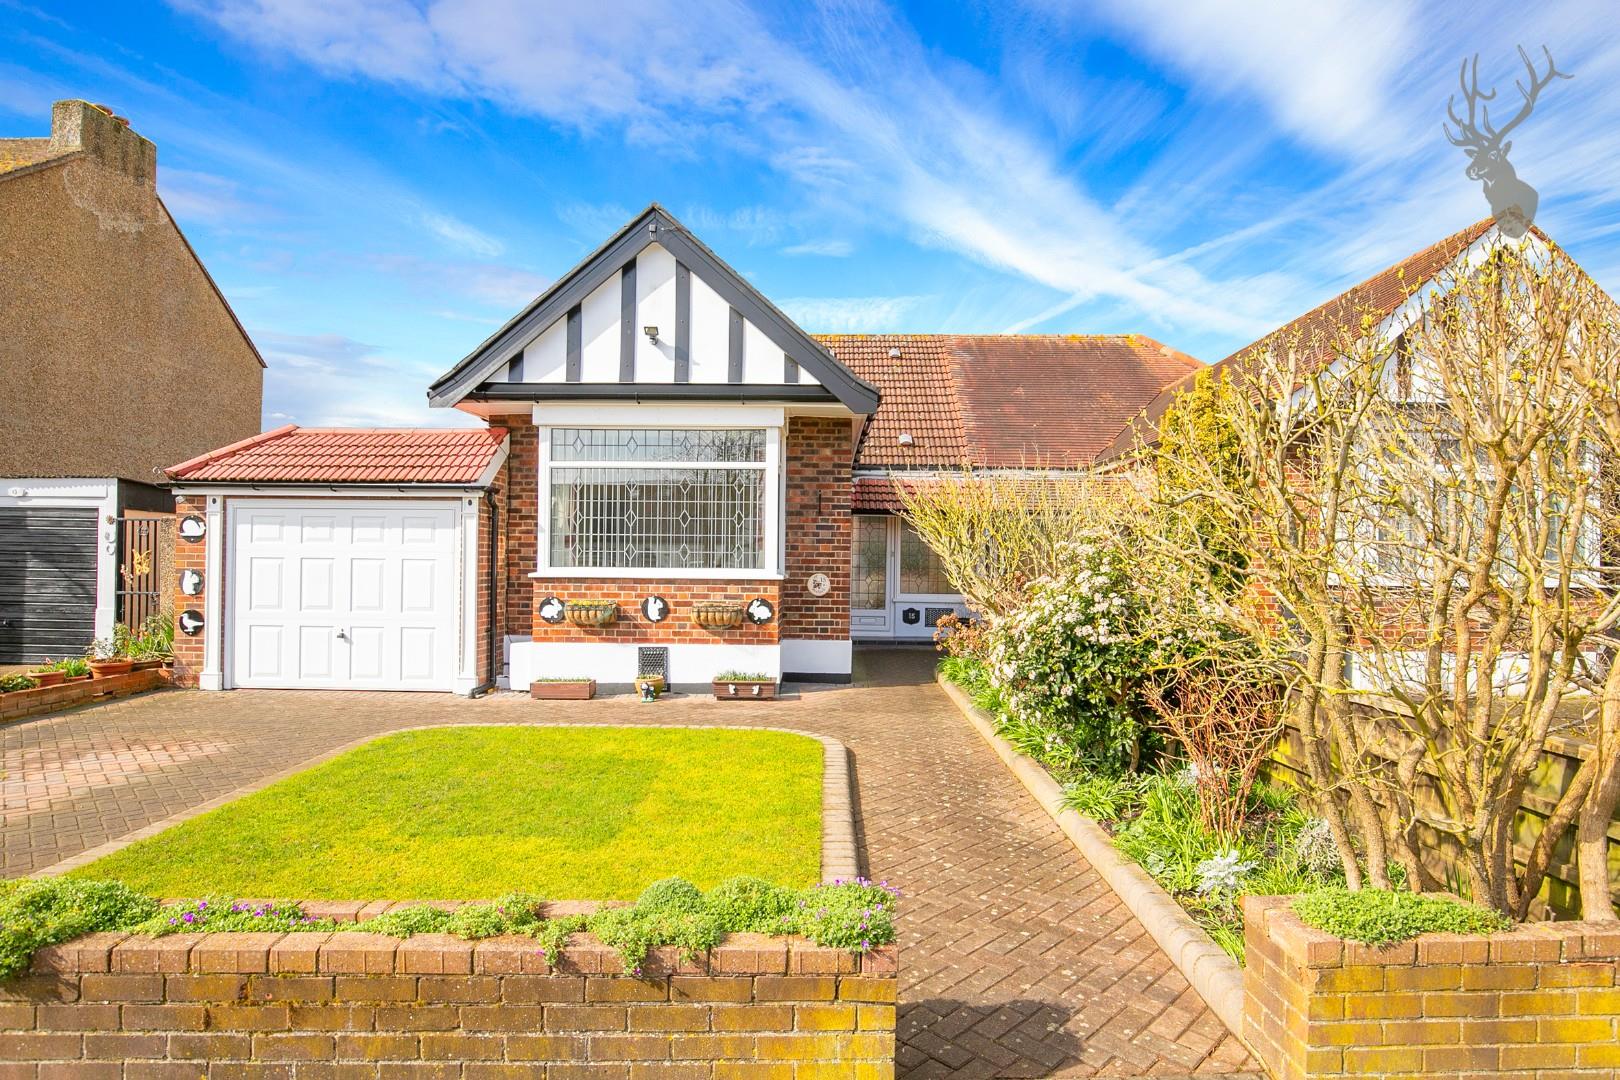 Similar Property: Bungalow in Theydon Bois